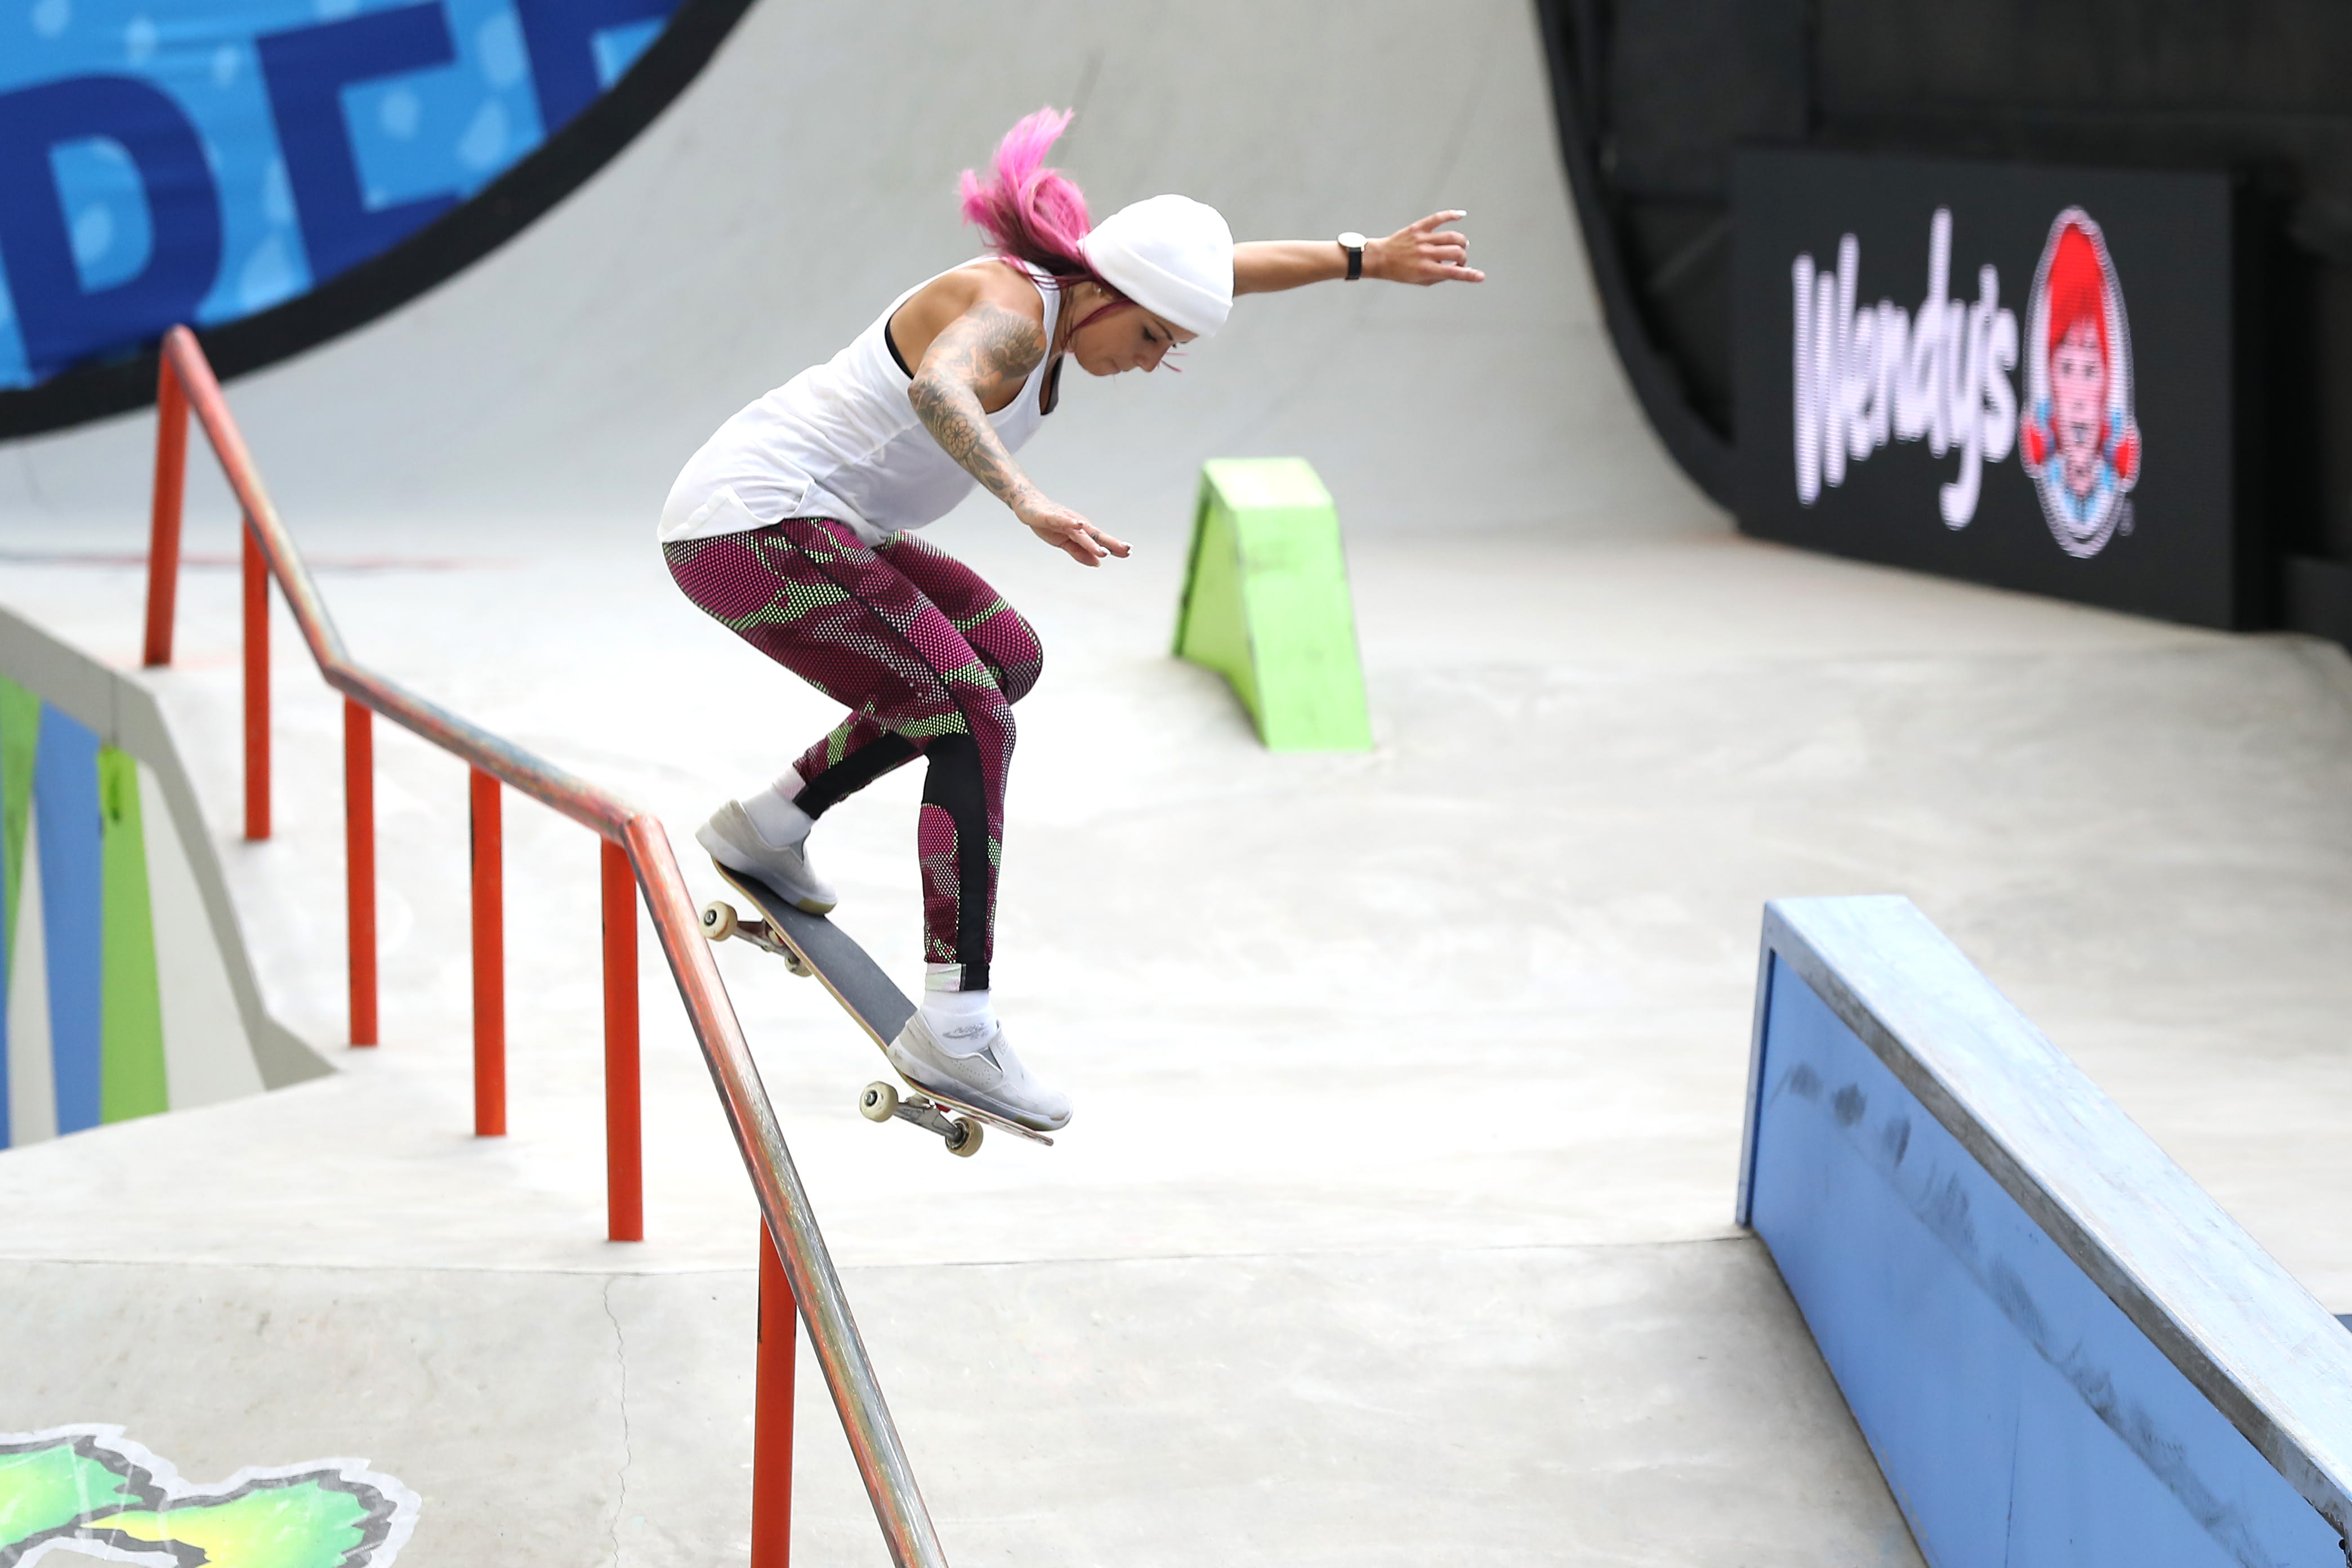 A skateboarder skates on a course during a competition.